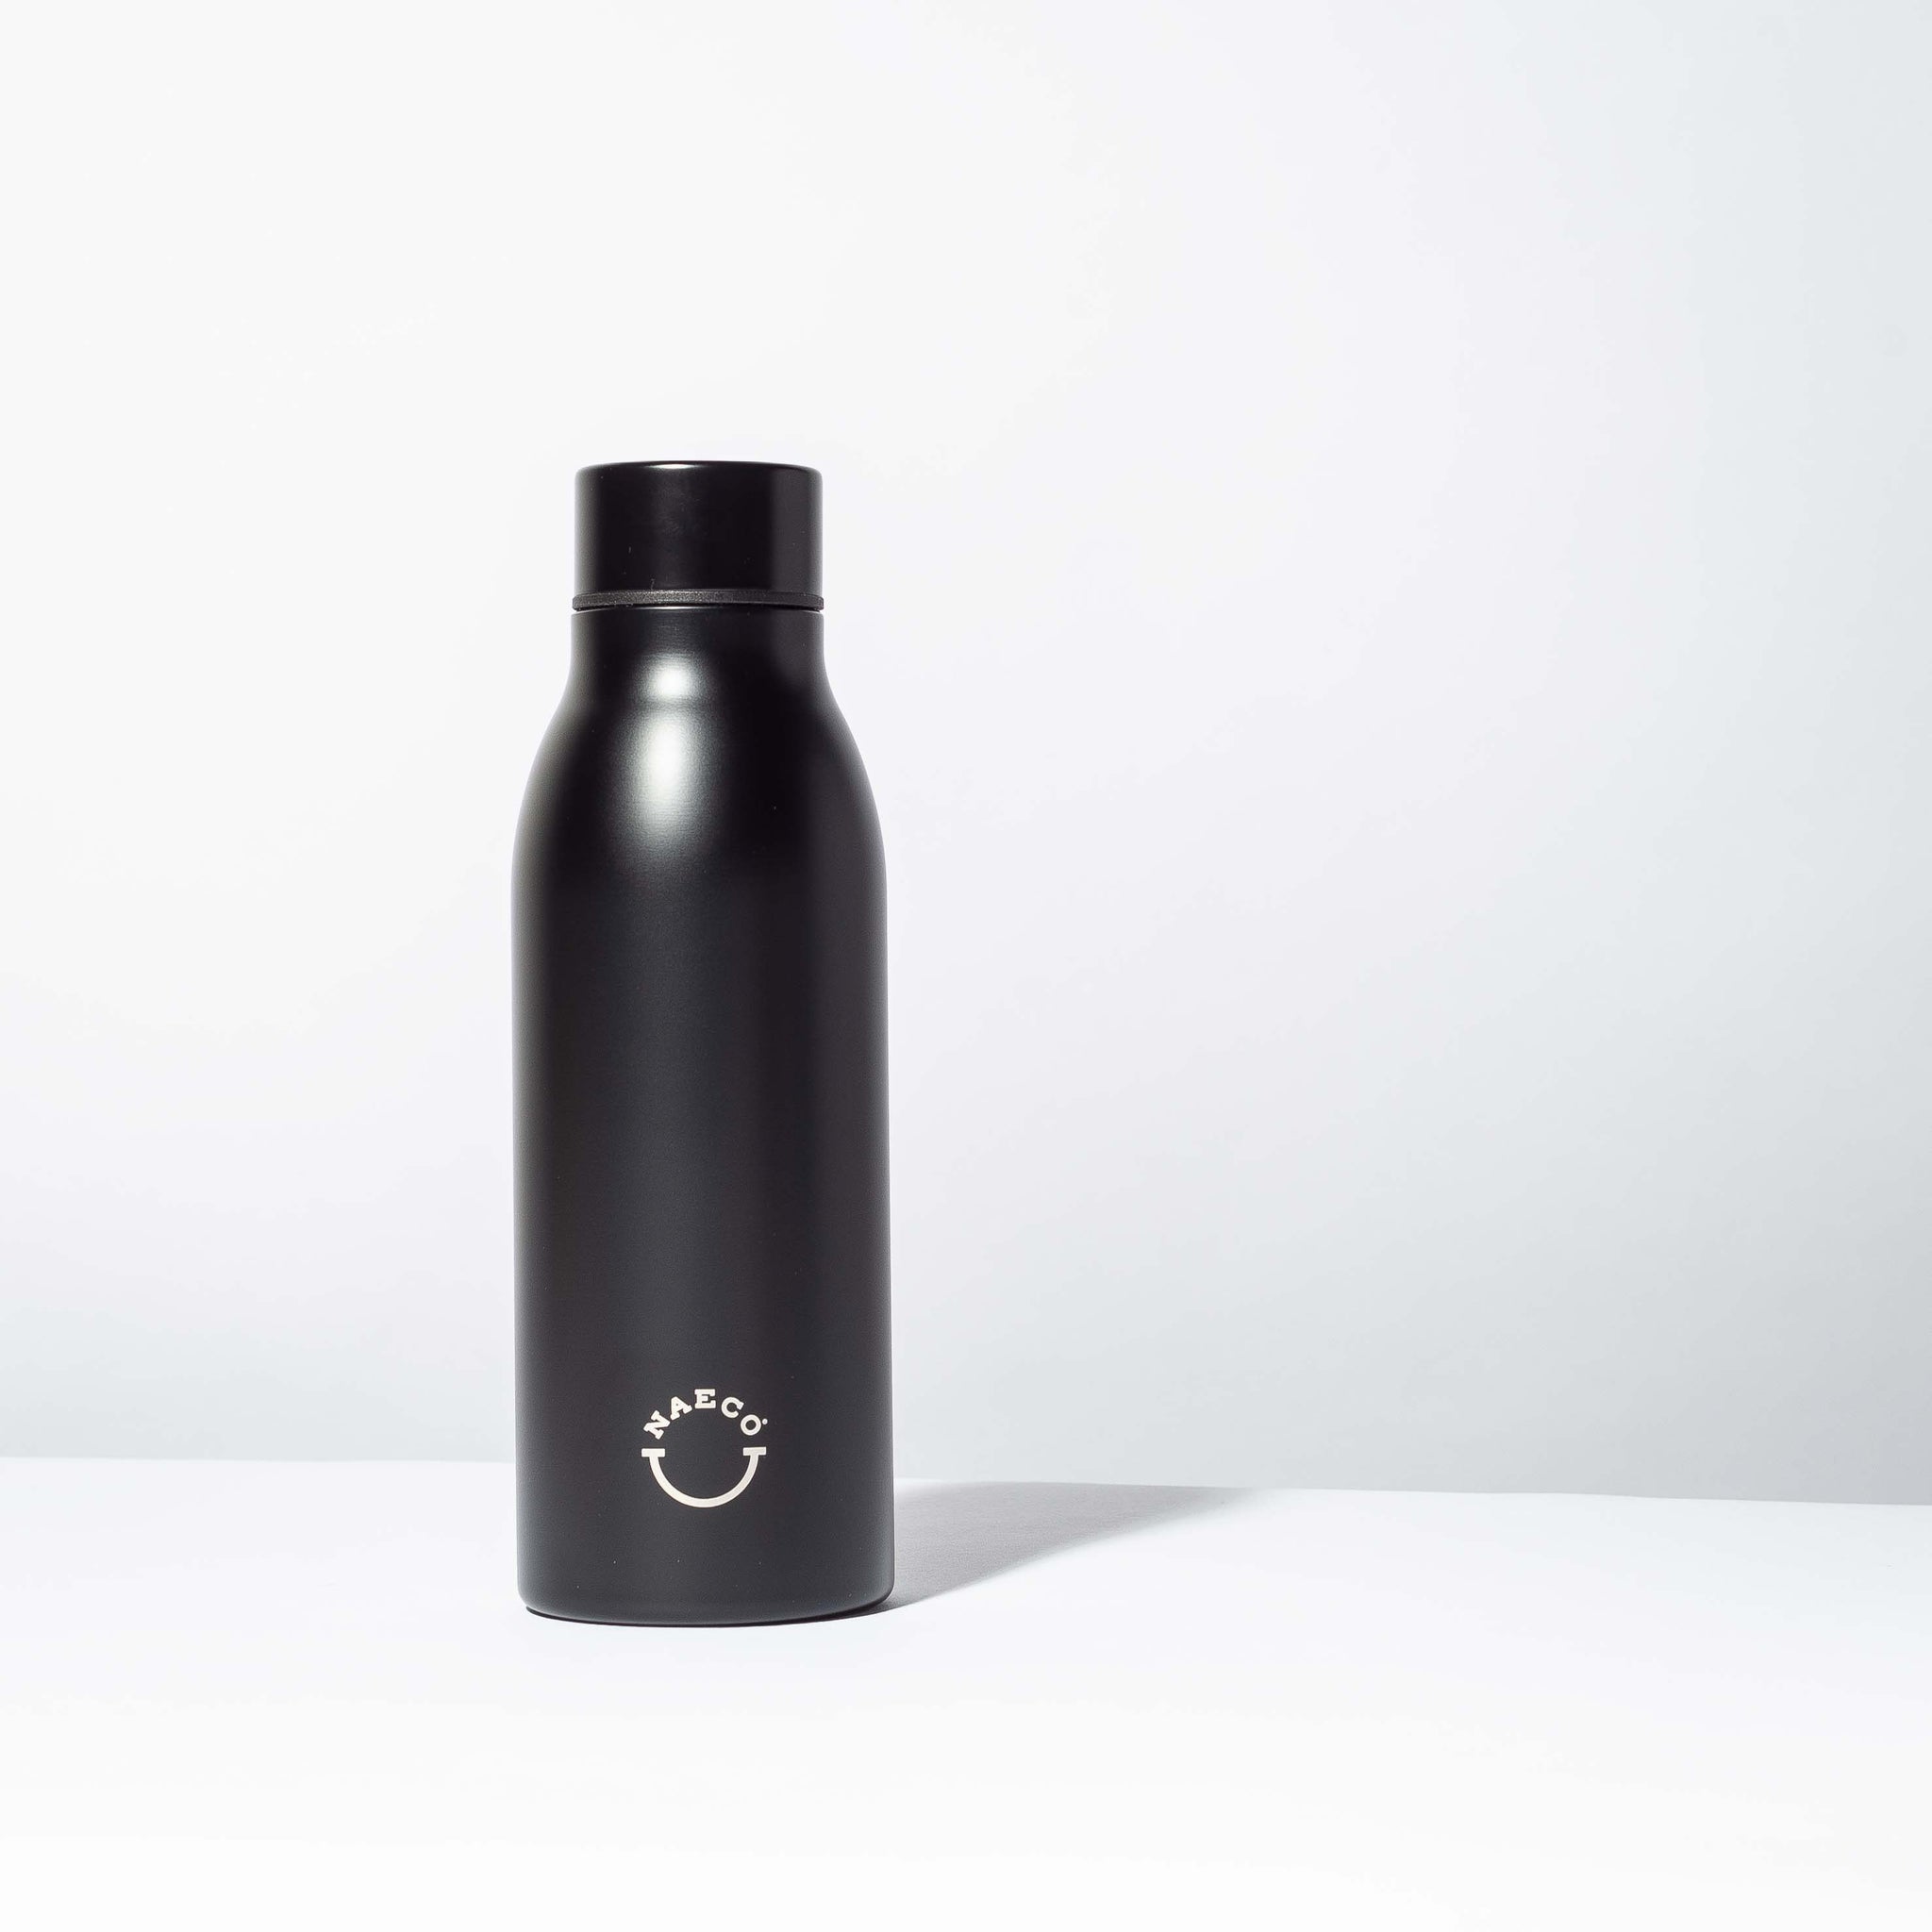 The NAECO Bottle: vacuum-insulated stainless steel